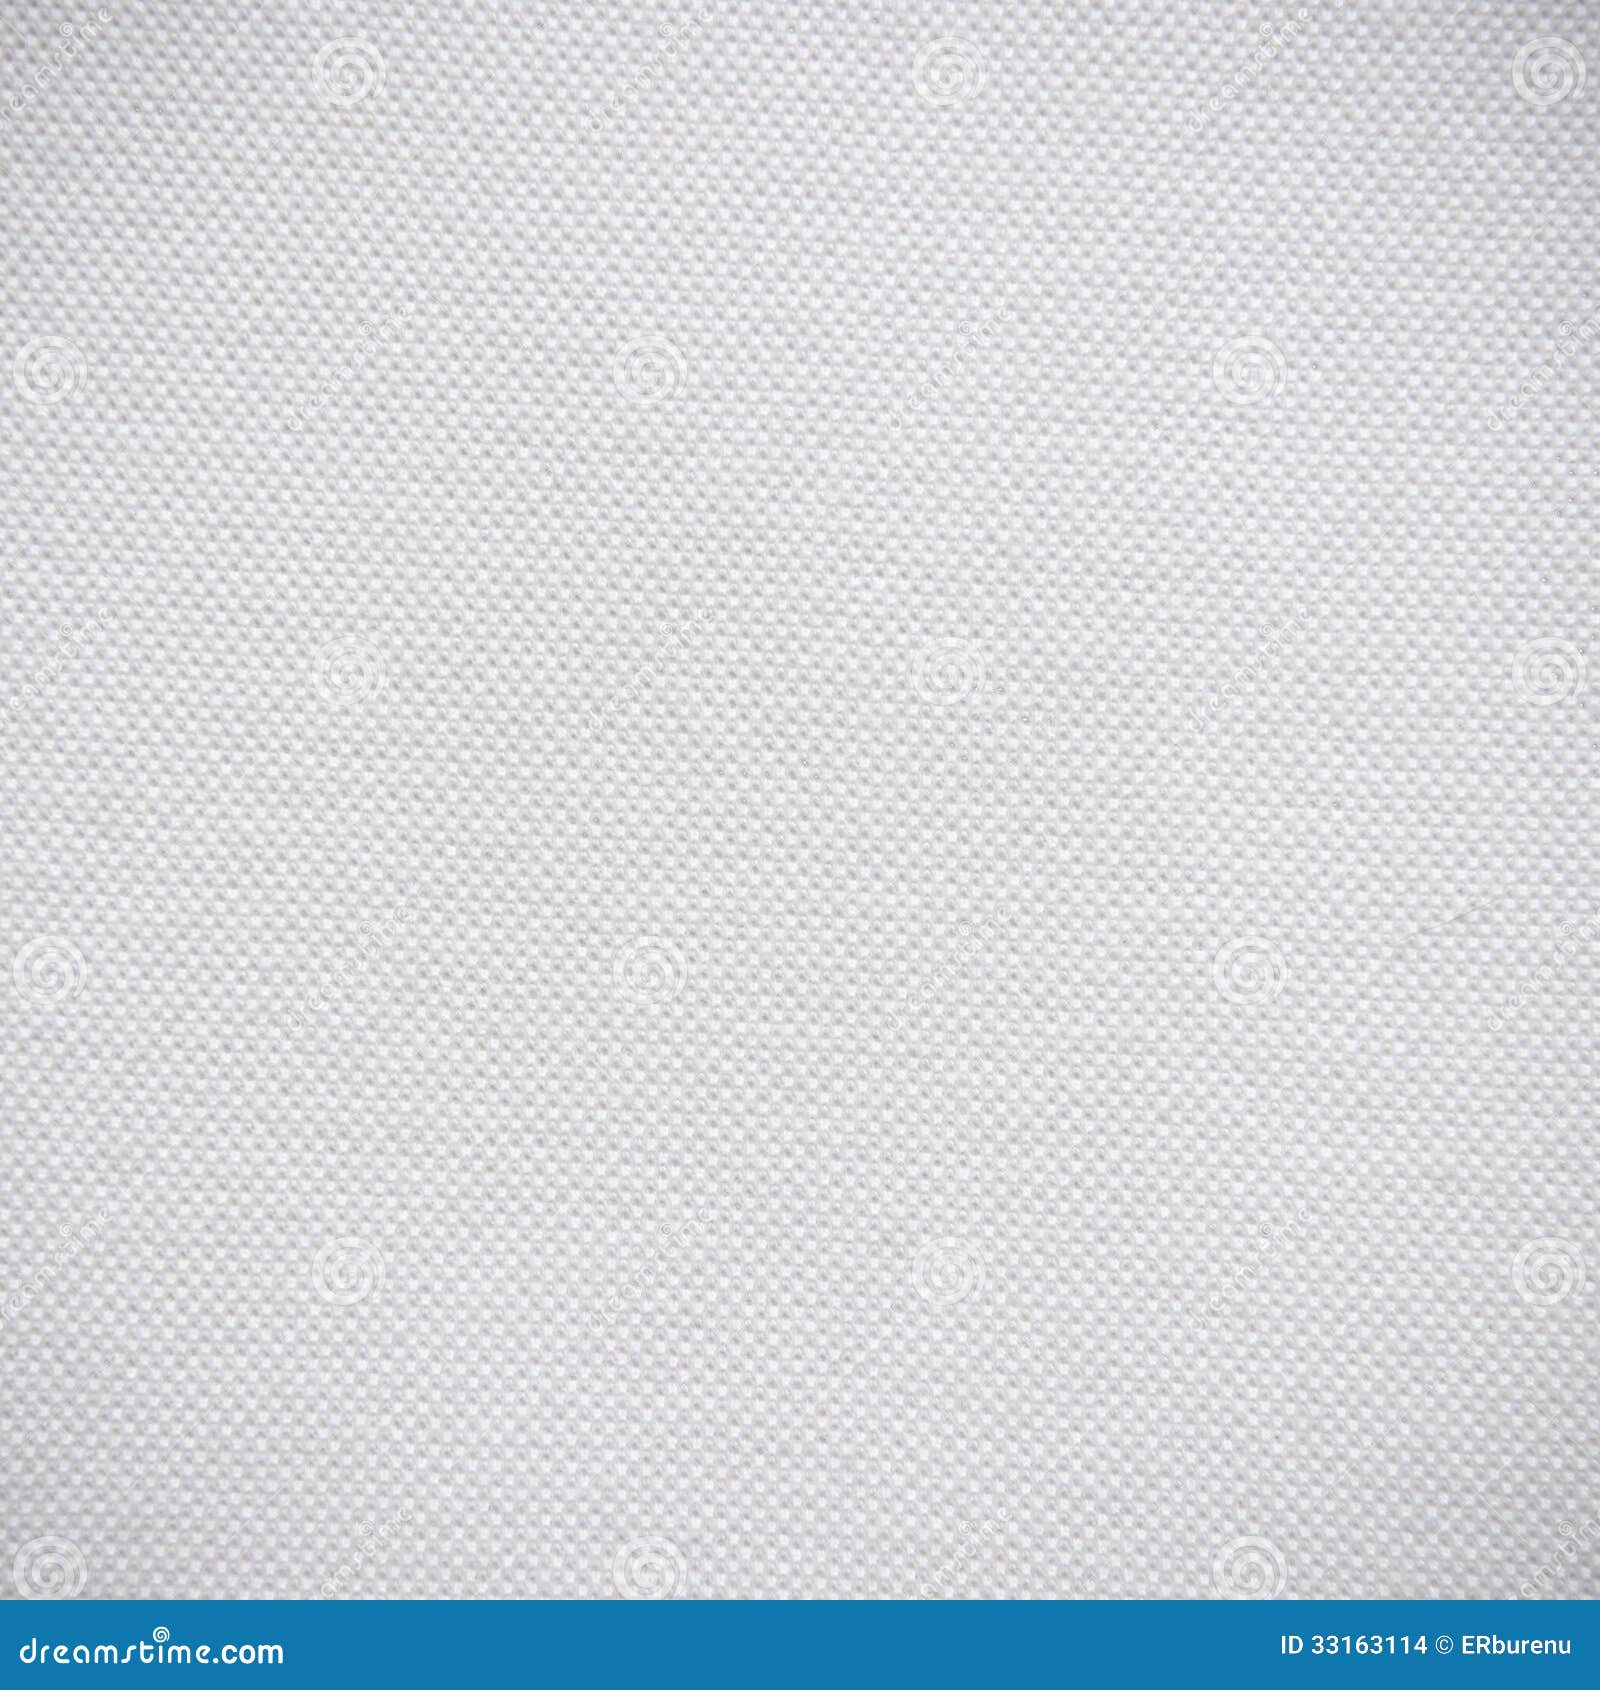 Plain Fabric Texture: Background Images & Pictures